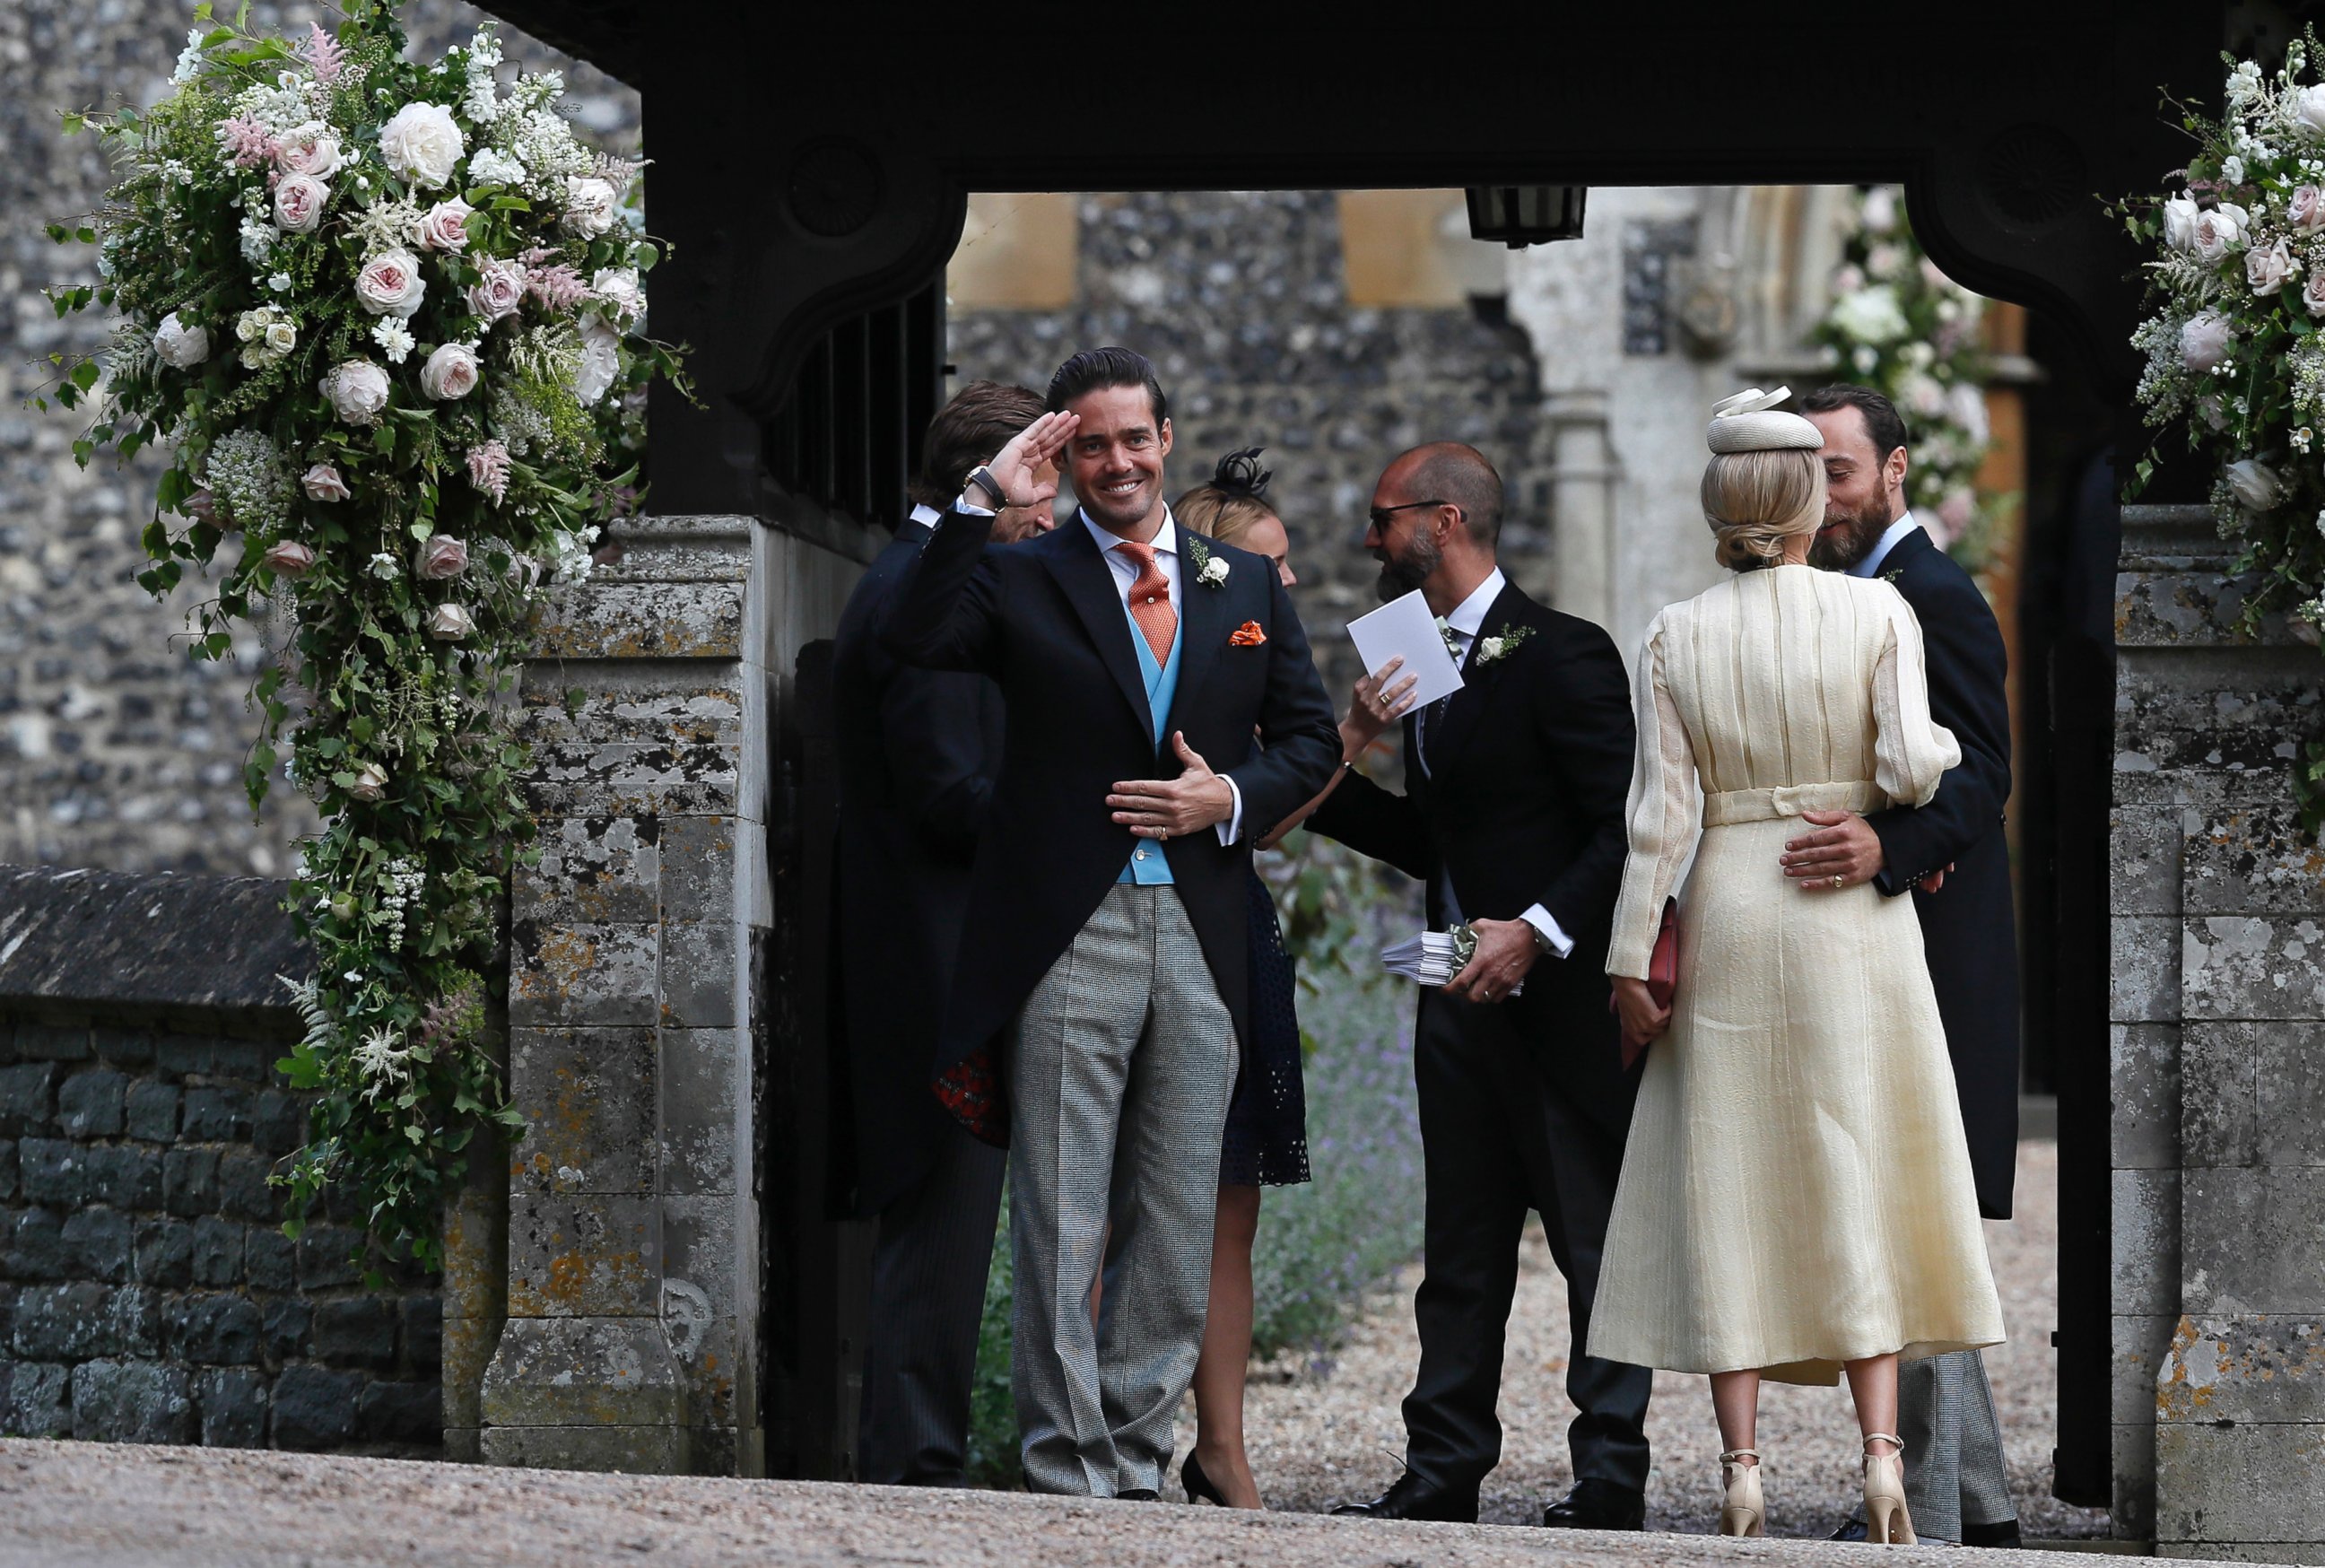 PHOTO: Spencer Matthews, left, gestures as he stands with James Middleton, right, and Donna Air at the entrance of St Mark's Church in Englefield, England, ahead of the wedding of Pippa Middleton and James Matthews, May 20, 2017.